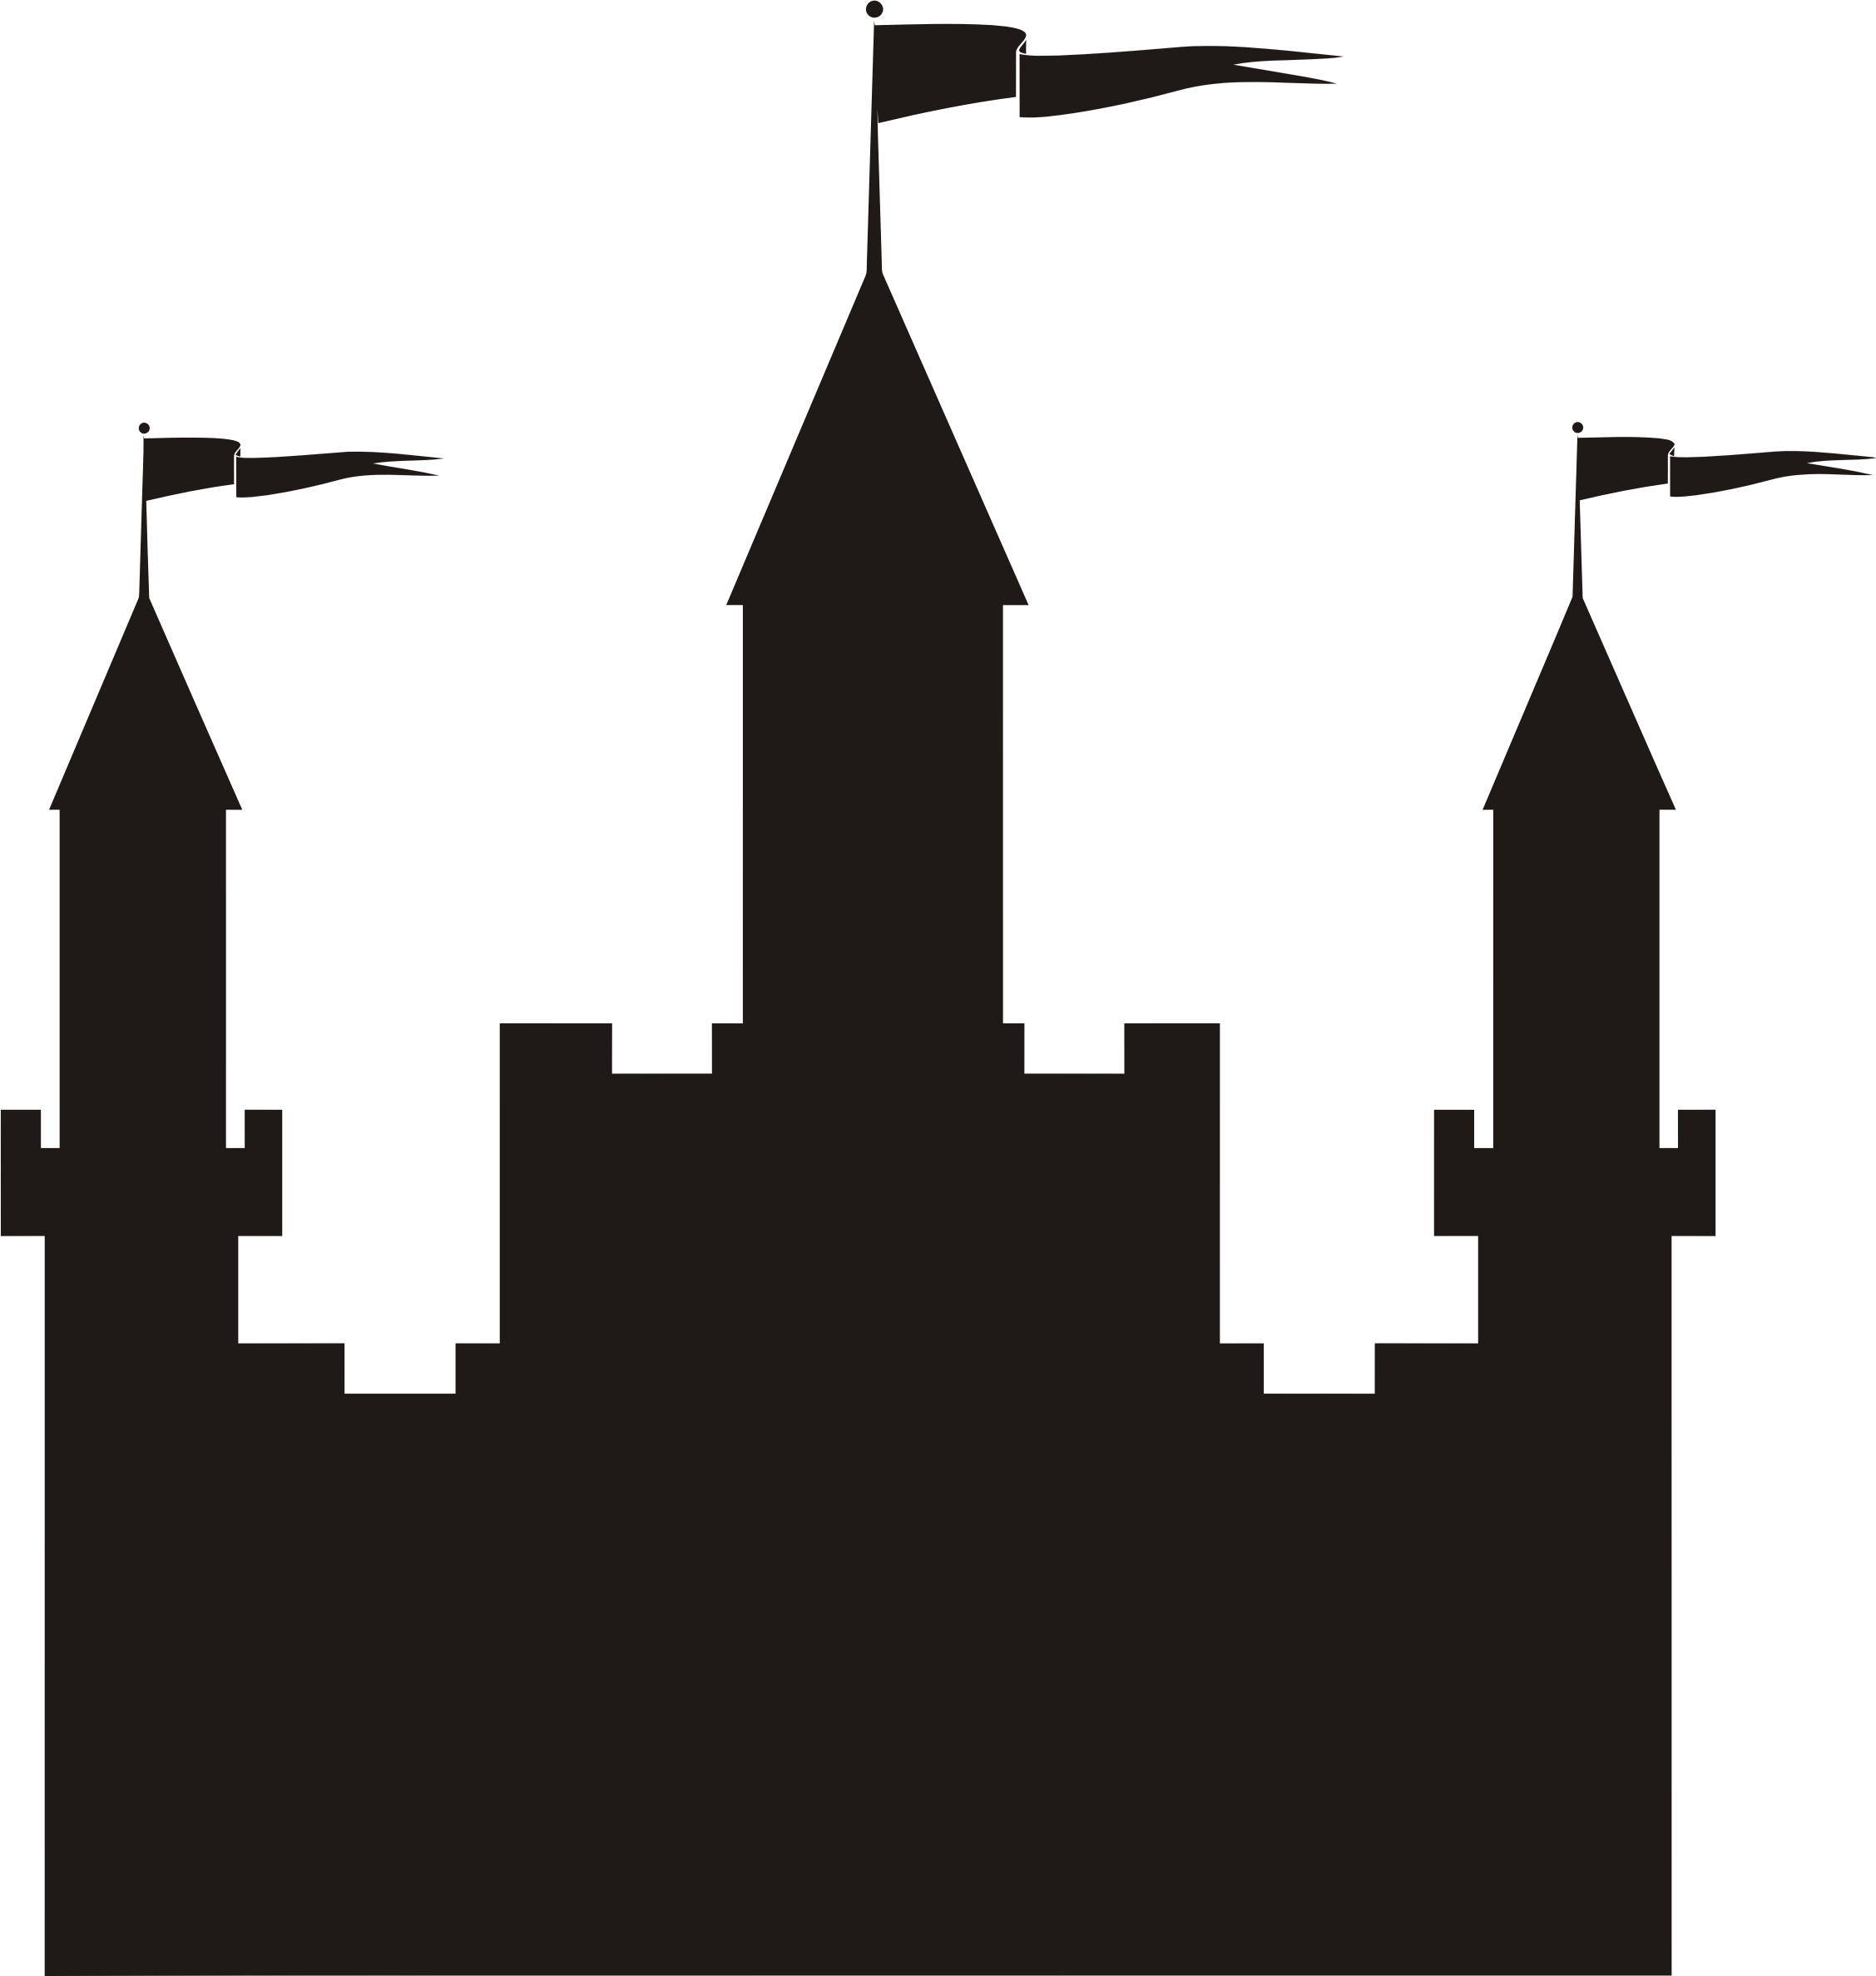 Castle silhouette at getdrawings. Tower clipart haunted